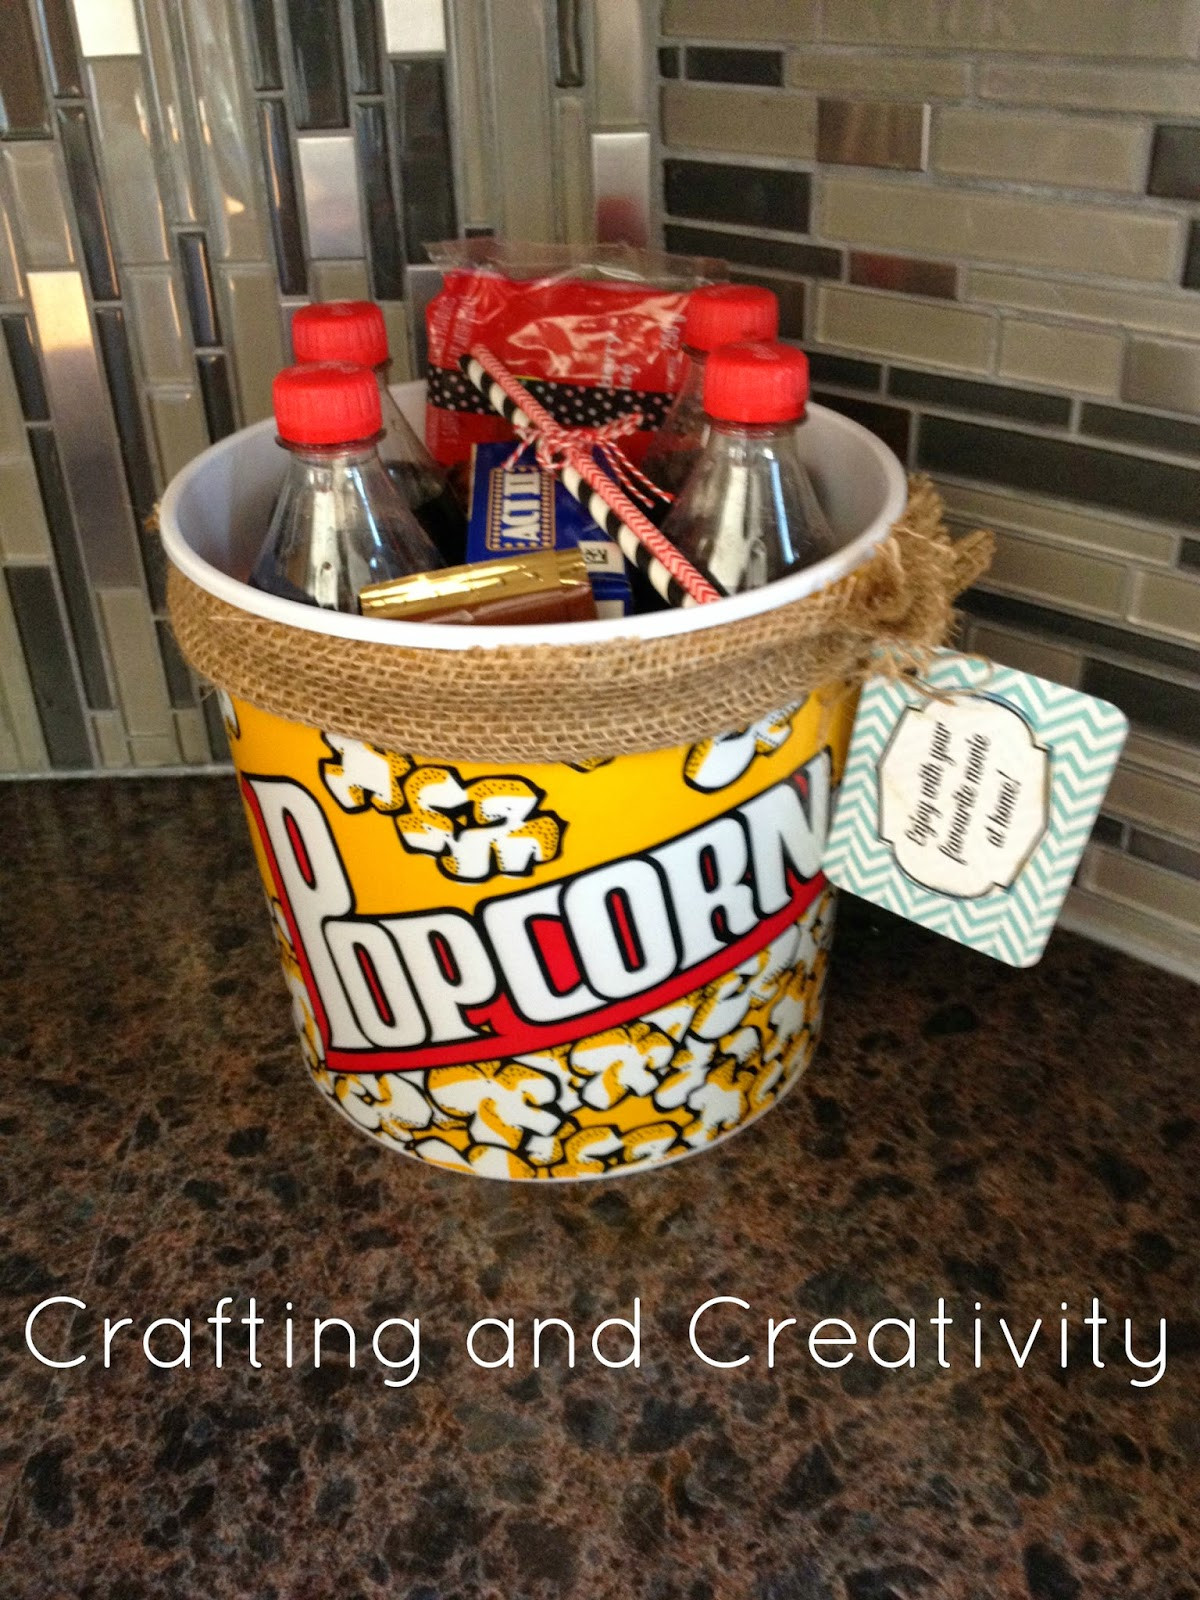 Movie Theater Gift Basket Ideas
 Crafting and Creativity Movie Theatre Snacks Gift Idea